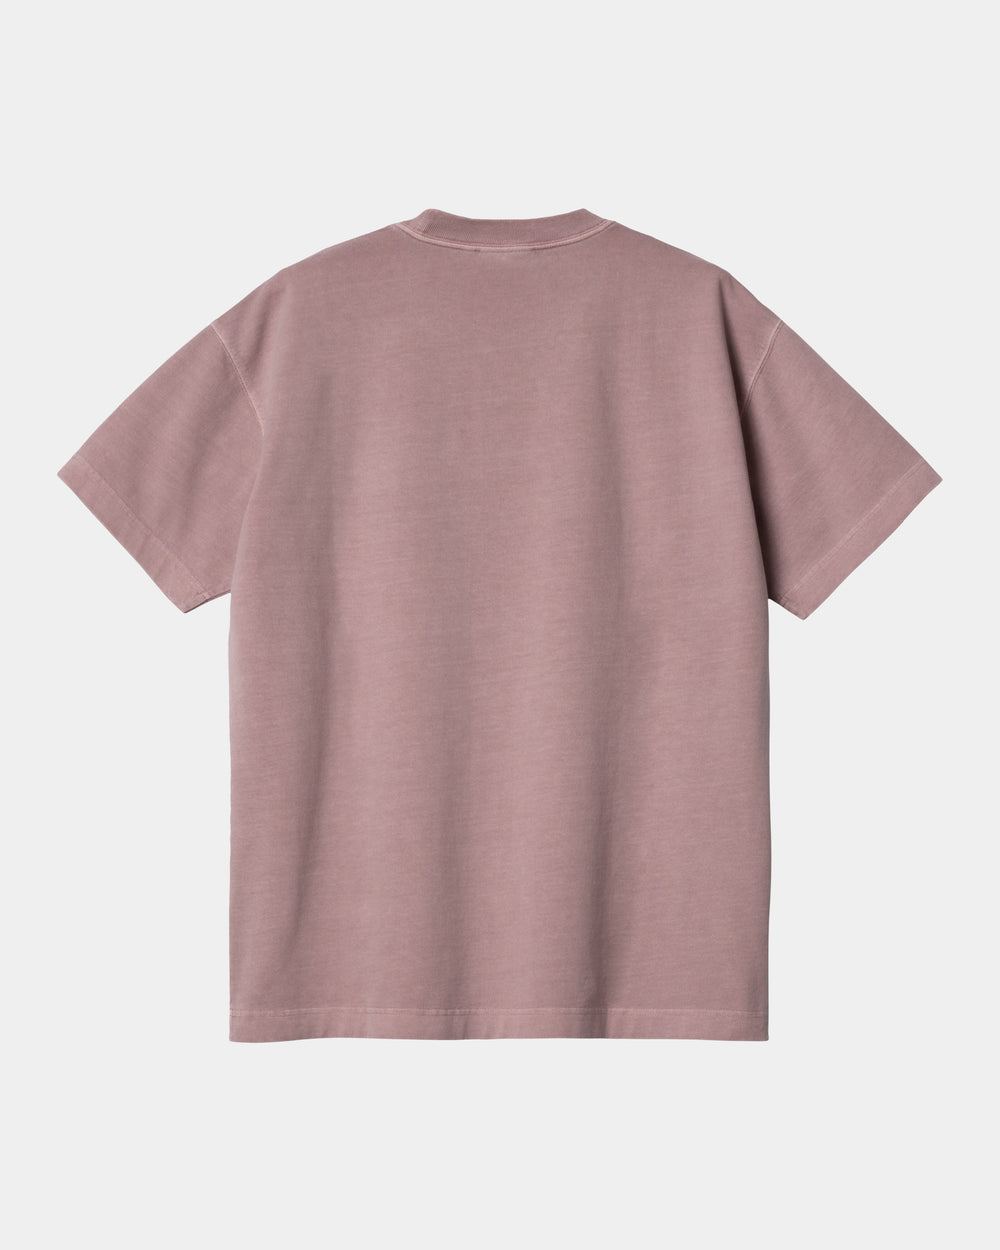 S/S Vista T-Shirt in Glassy Pink